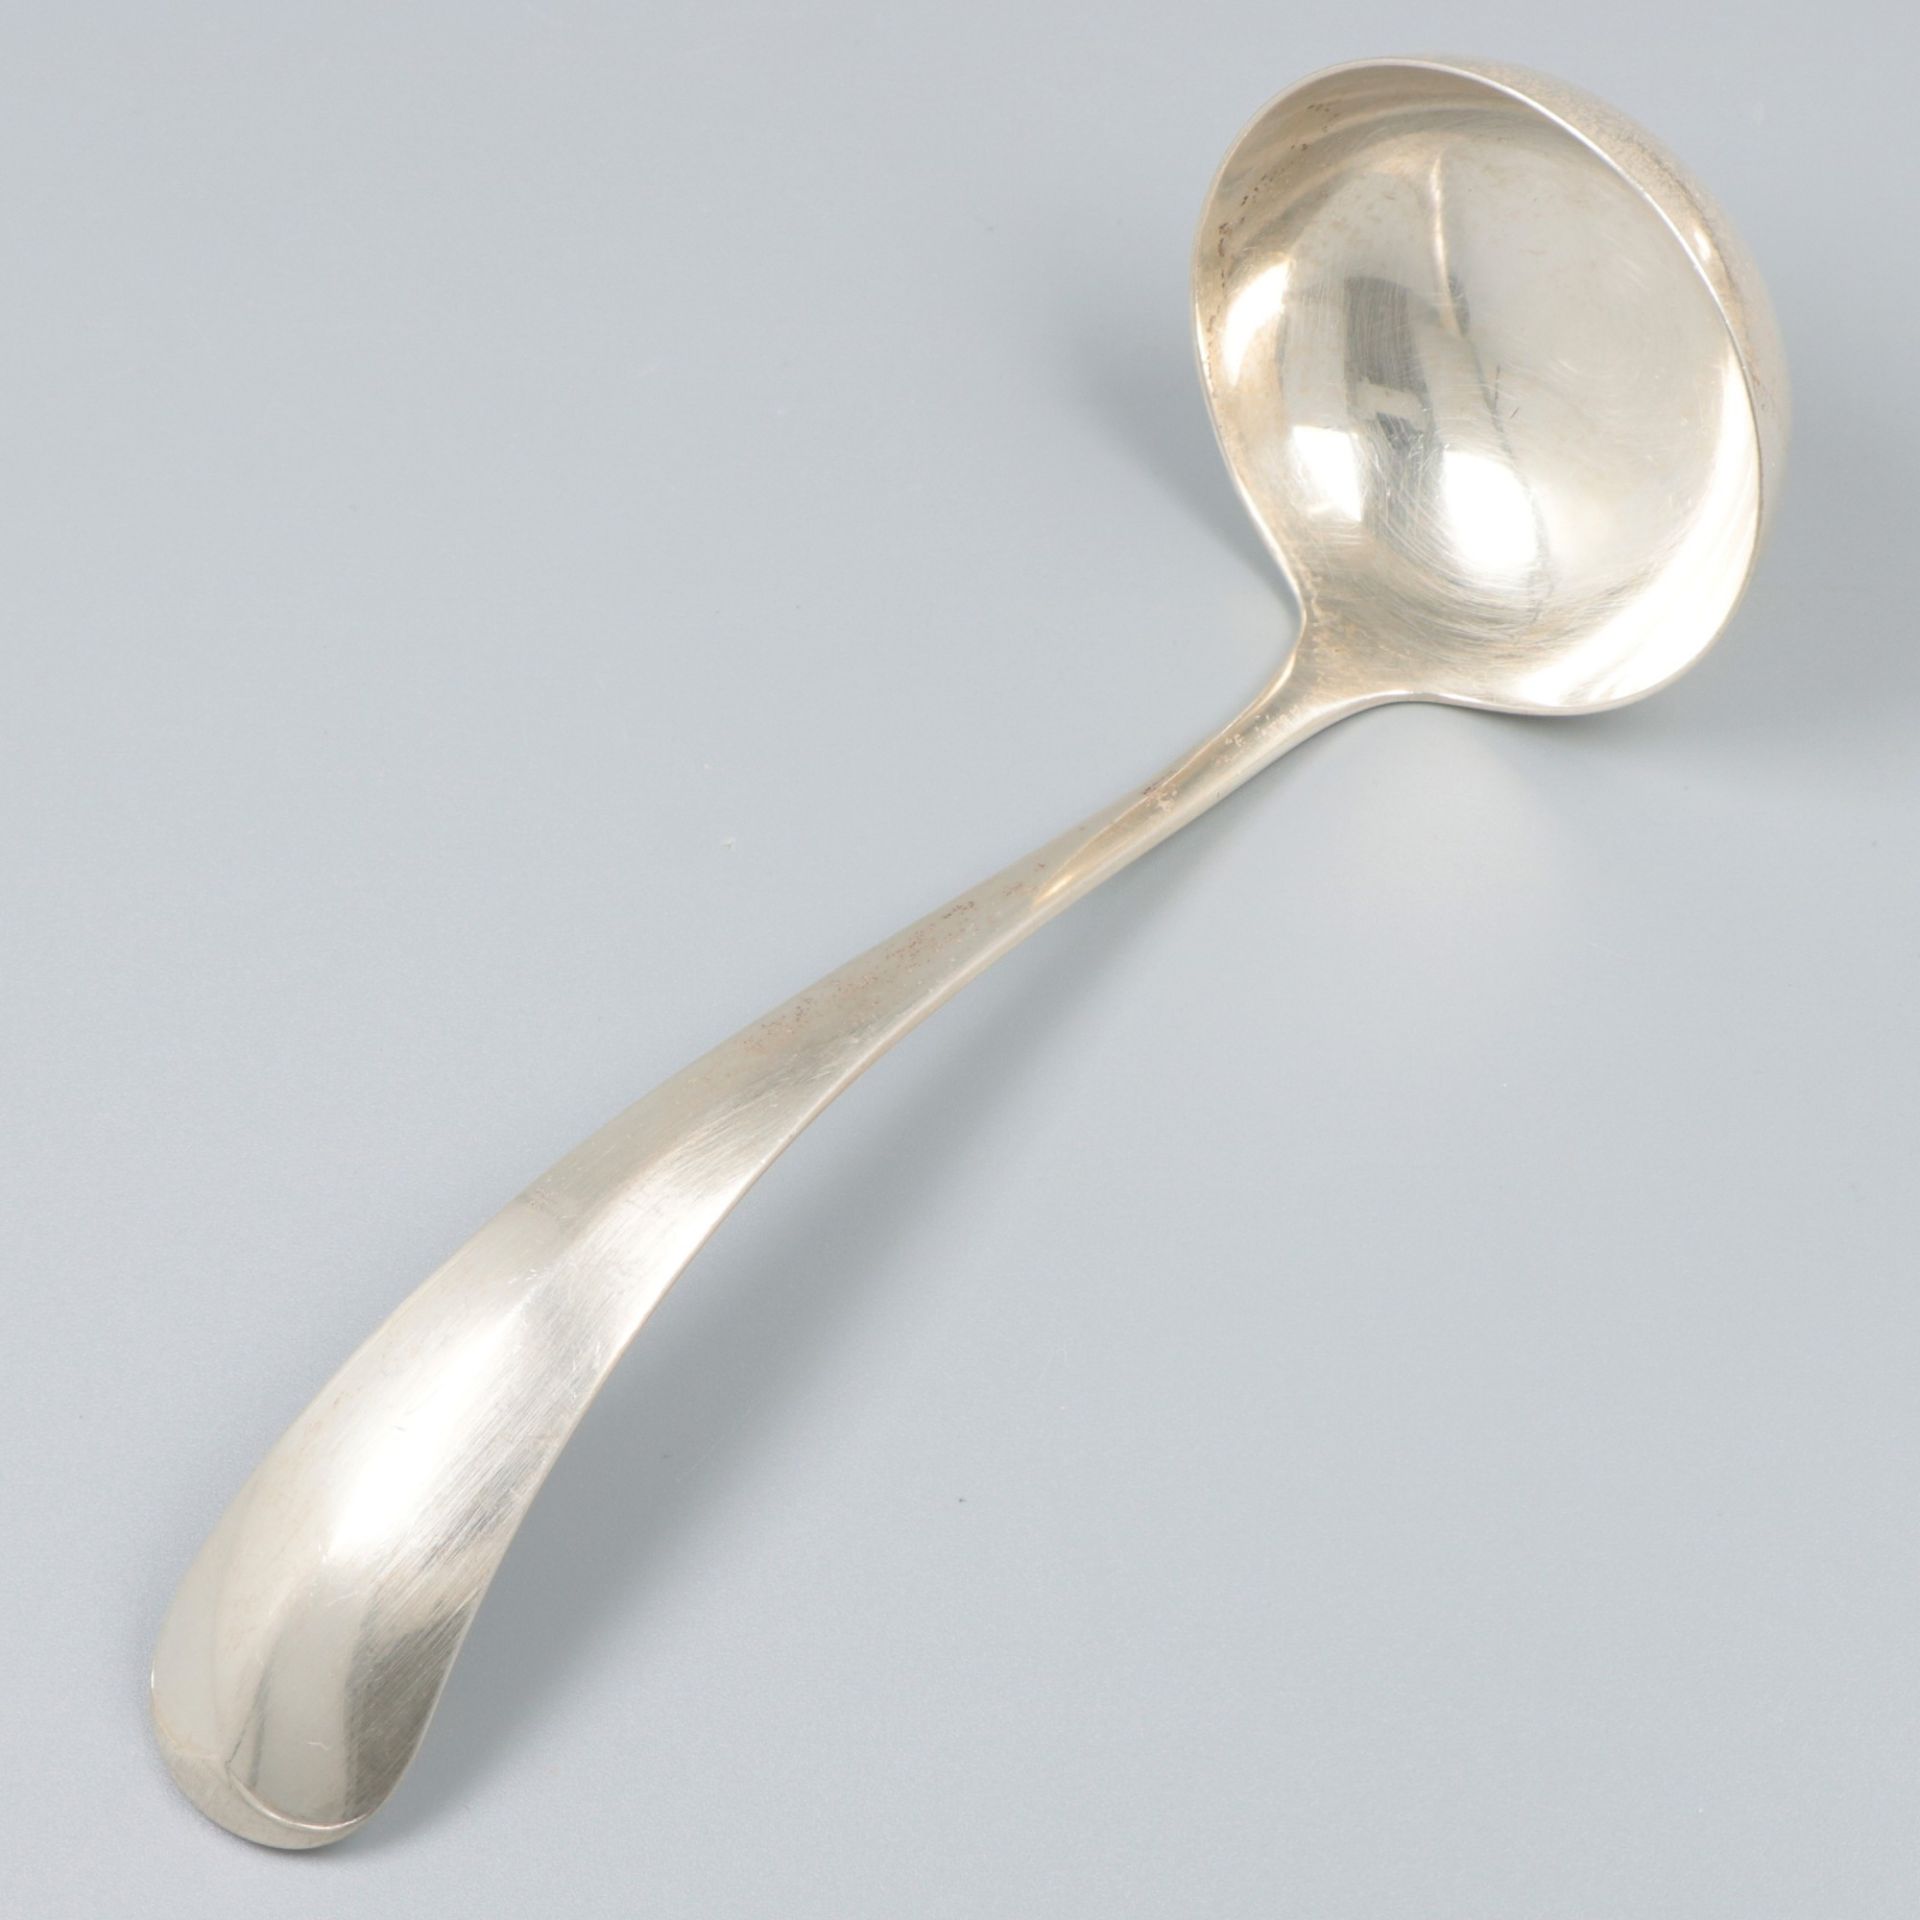 Sauce spoon, vegetable serving spoon & potato serving spoon "Haags Lofje", silver. - Image 4 of 6